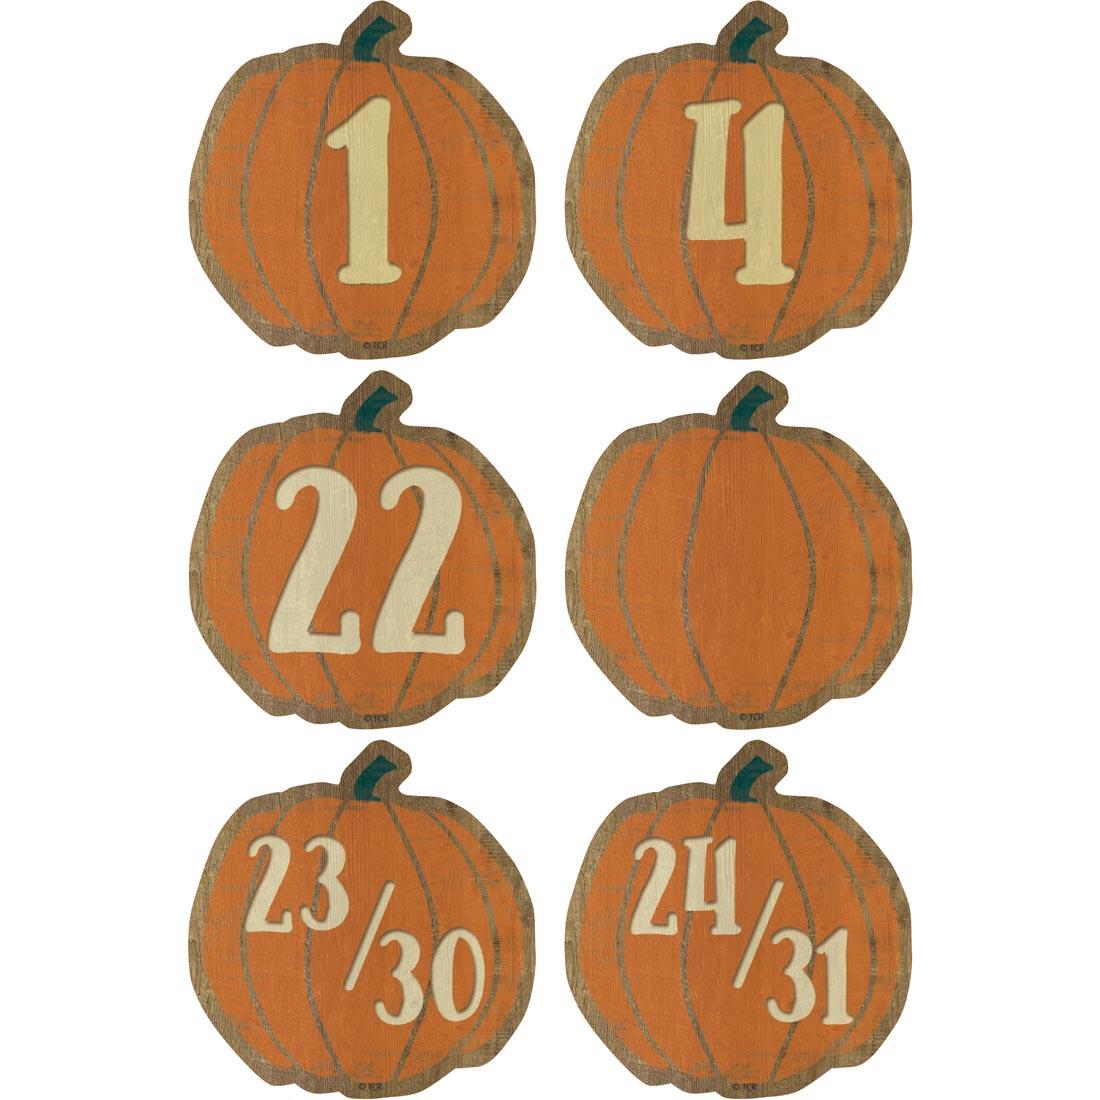 Pumpkins Calendar Days from the Home Sweet Classroom collection by Teacher Created Resources